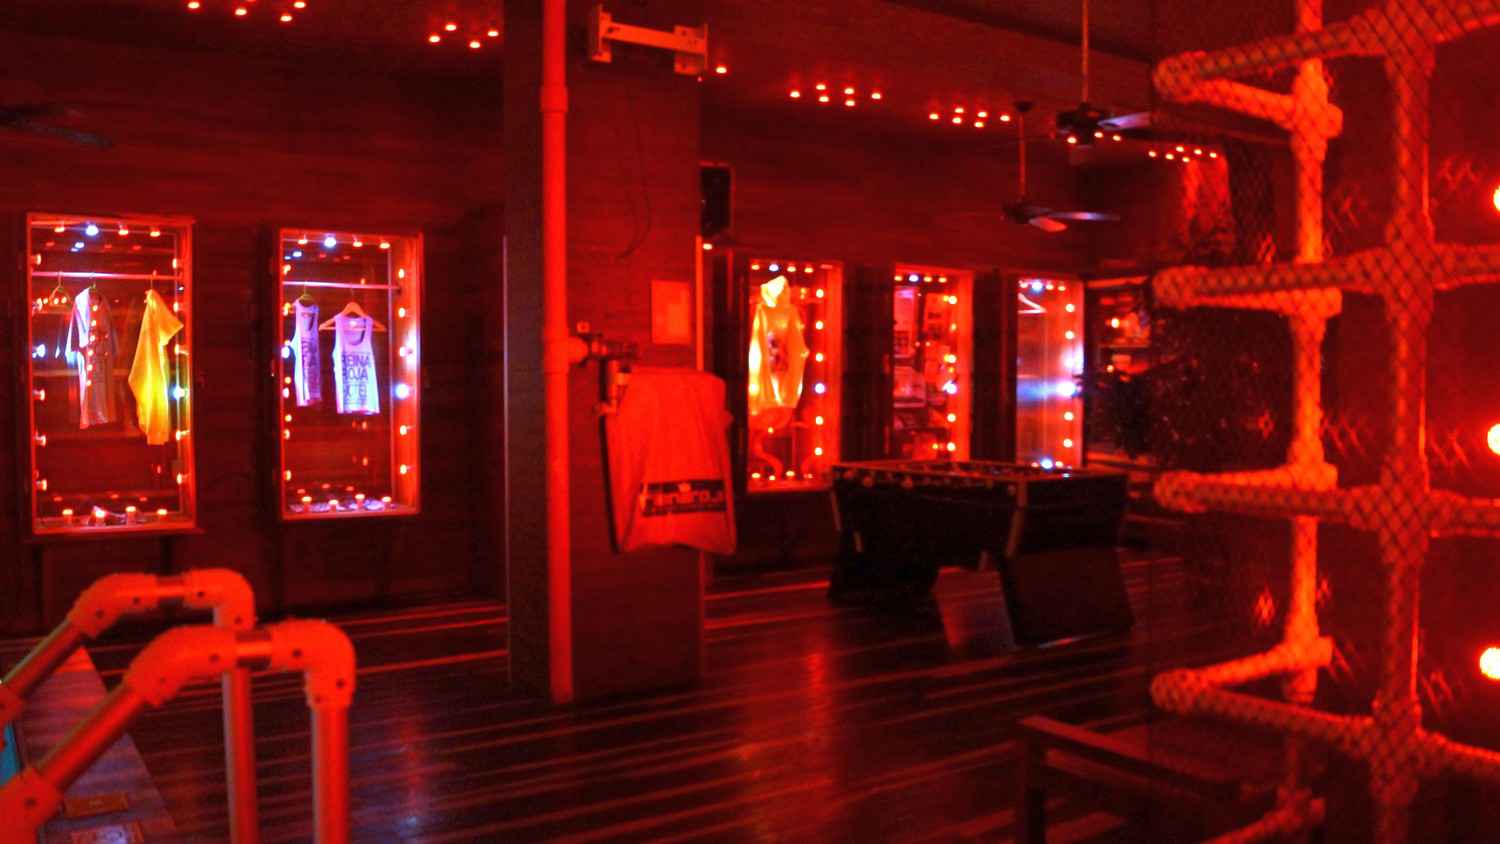 Swinger sex lounges clubs cancun mexico